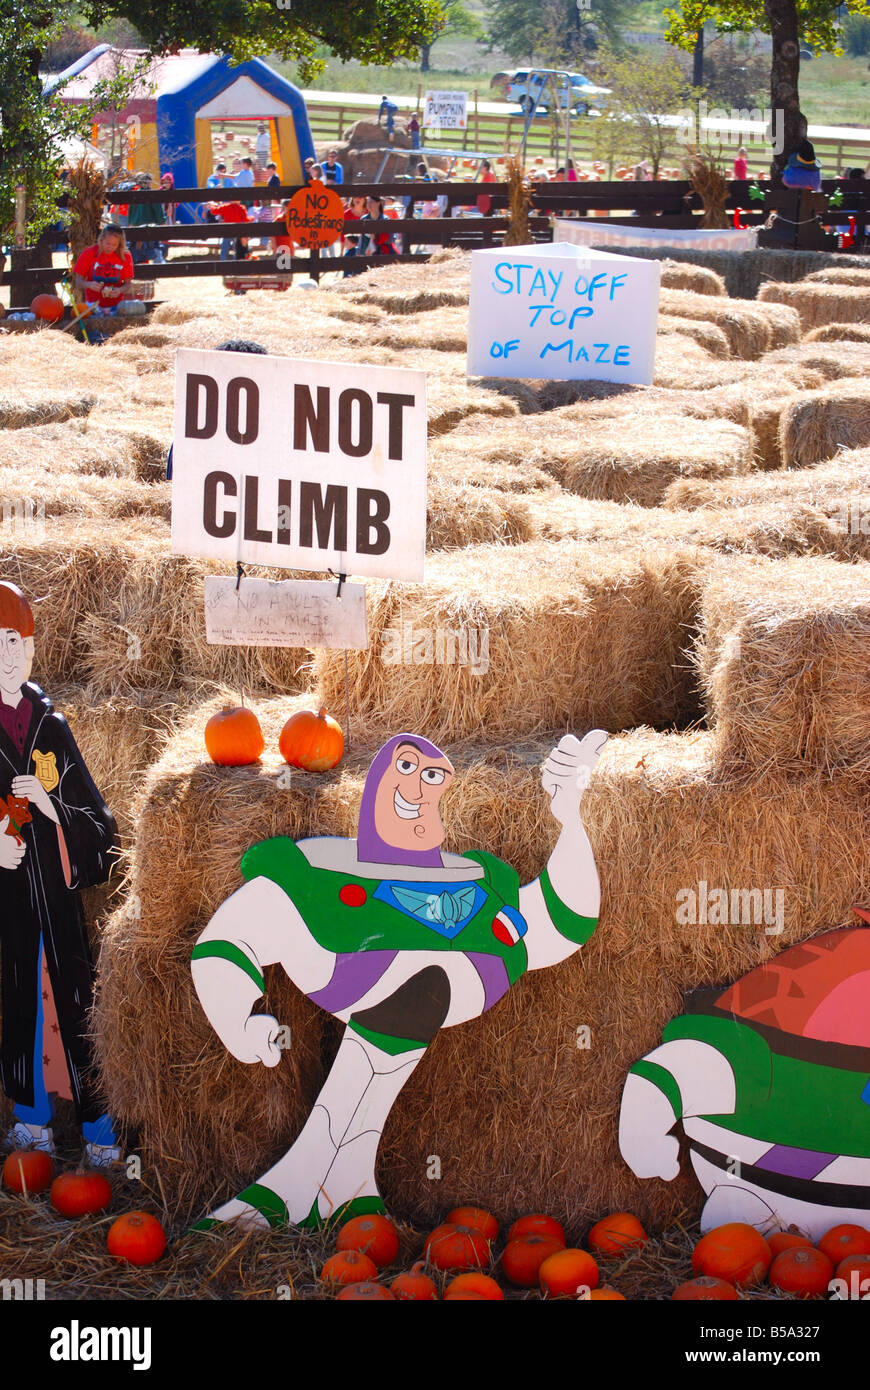 Buzz Lightyear wooden cutout in front of a hay bale maze at a fall festival in suburban north Texas town. Stock Photo